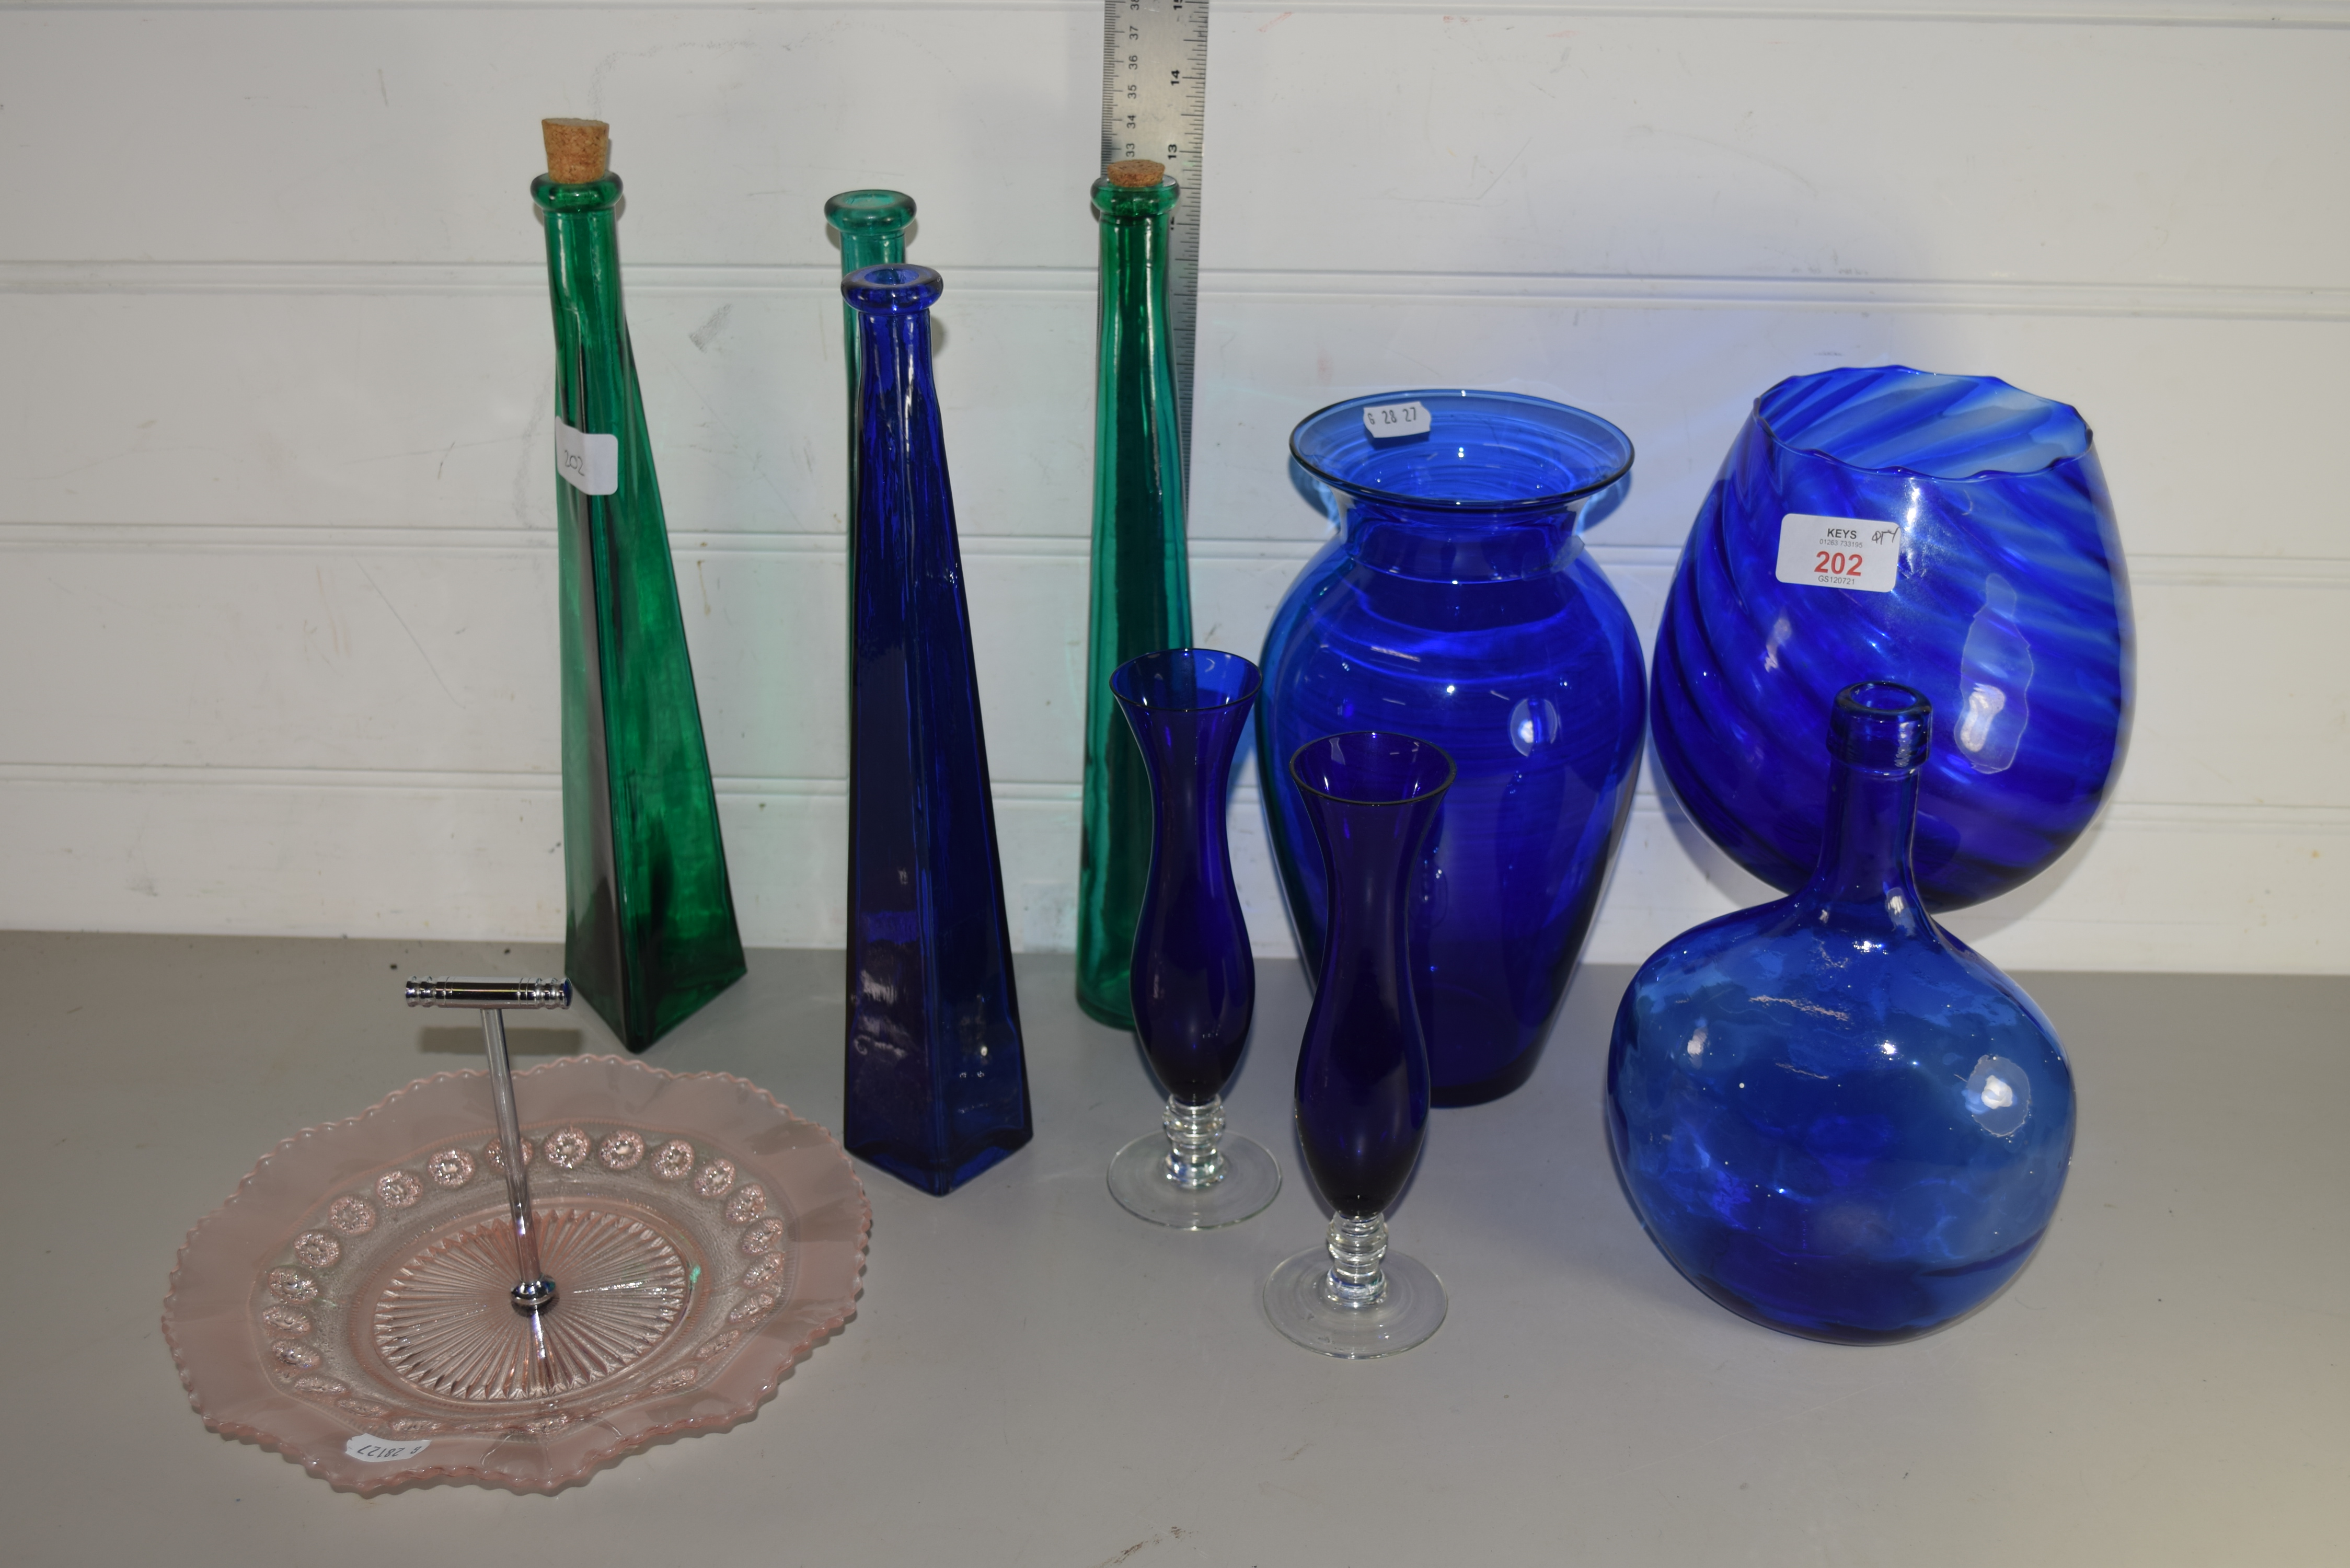 GLASS WARES, GREEN AND BLUE VASES